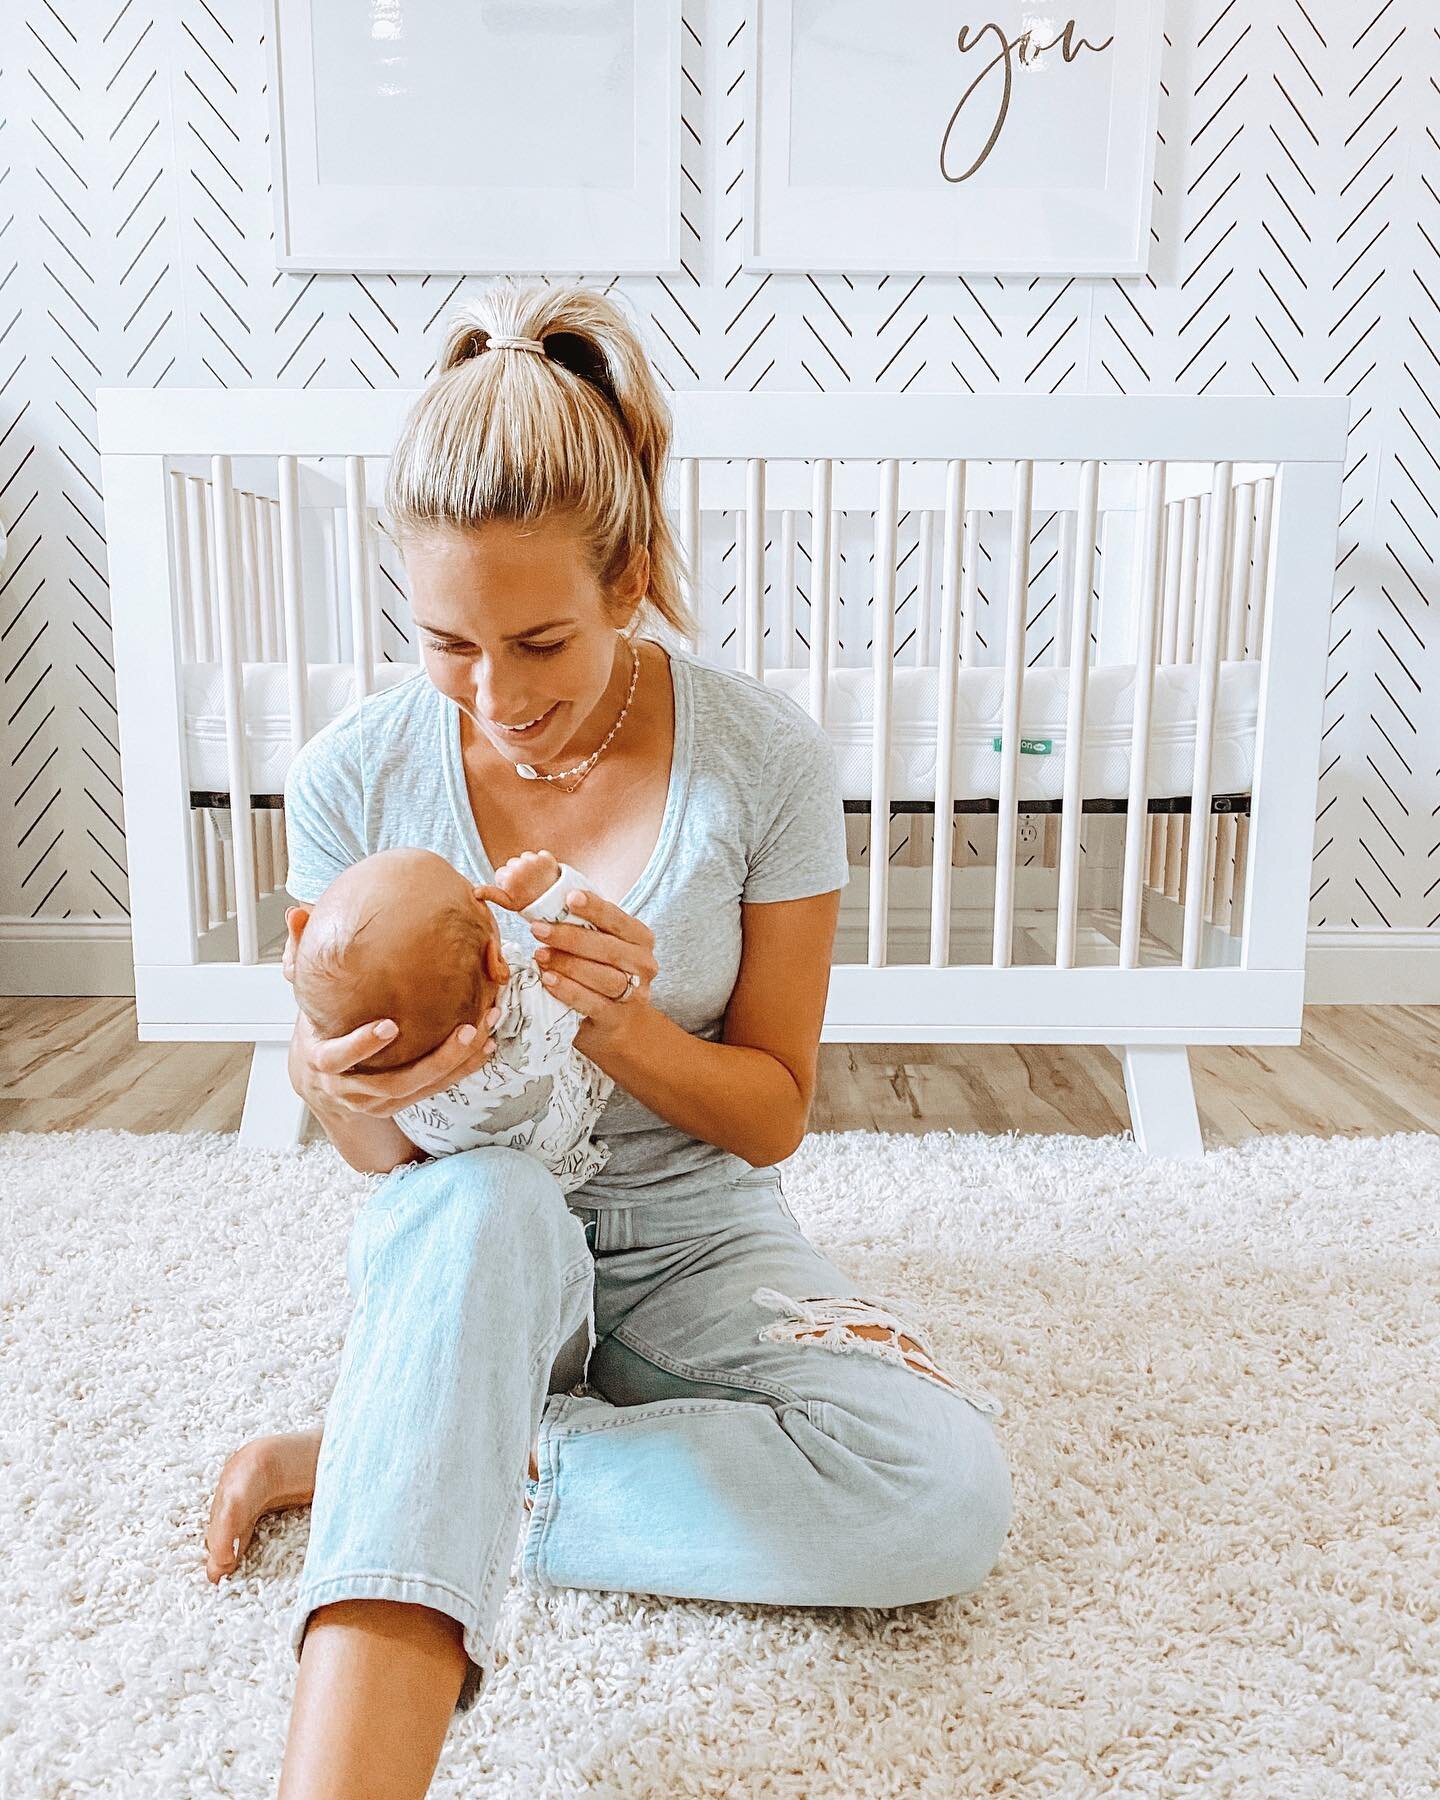 we aren&rsquo;t ready to leave Brody in his crib overnight just yet (cue &ldquo;𝚗𝚎𝚟𝚎𝚛 𝚐𝚛𝚘𝚠 𝚞𝚙&rdquo; by TSwift) 🥺💫 but when that time comes we will be at ease knowing that he&rsquo;s sleeping on a 100% breathable mattress ☁️☁️ @newtonliv